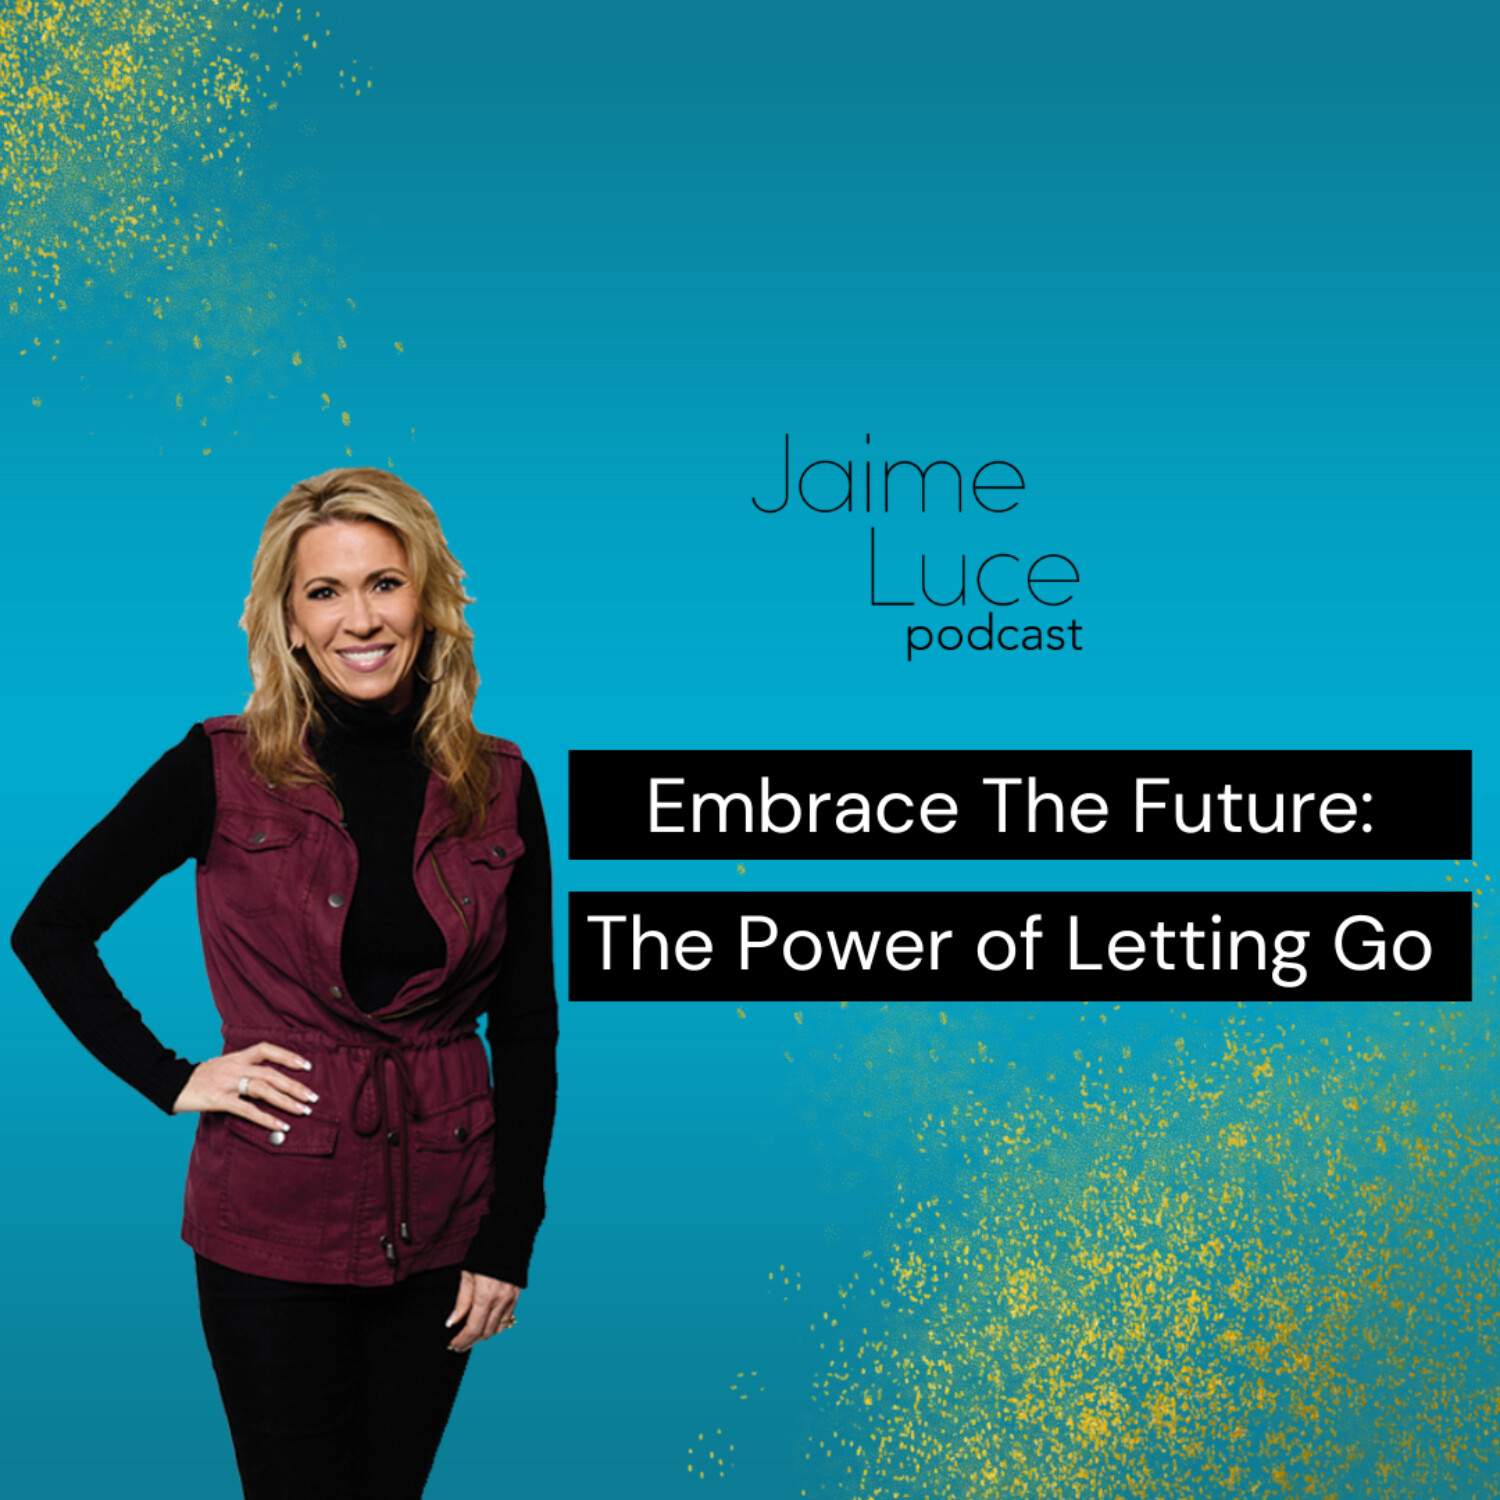 Embrace The Future: The Power of Letting Go